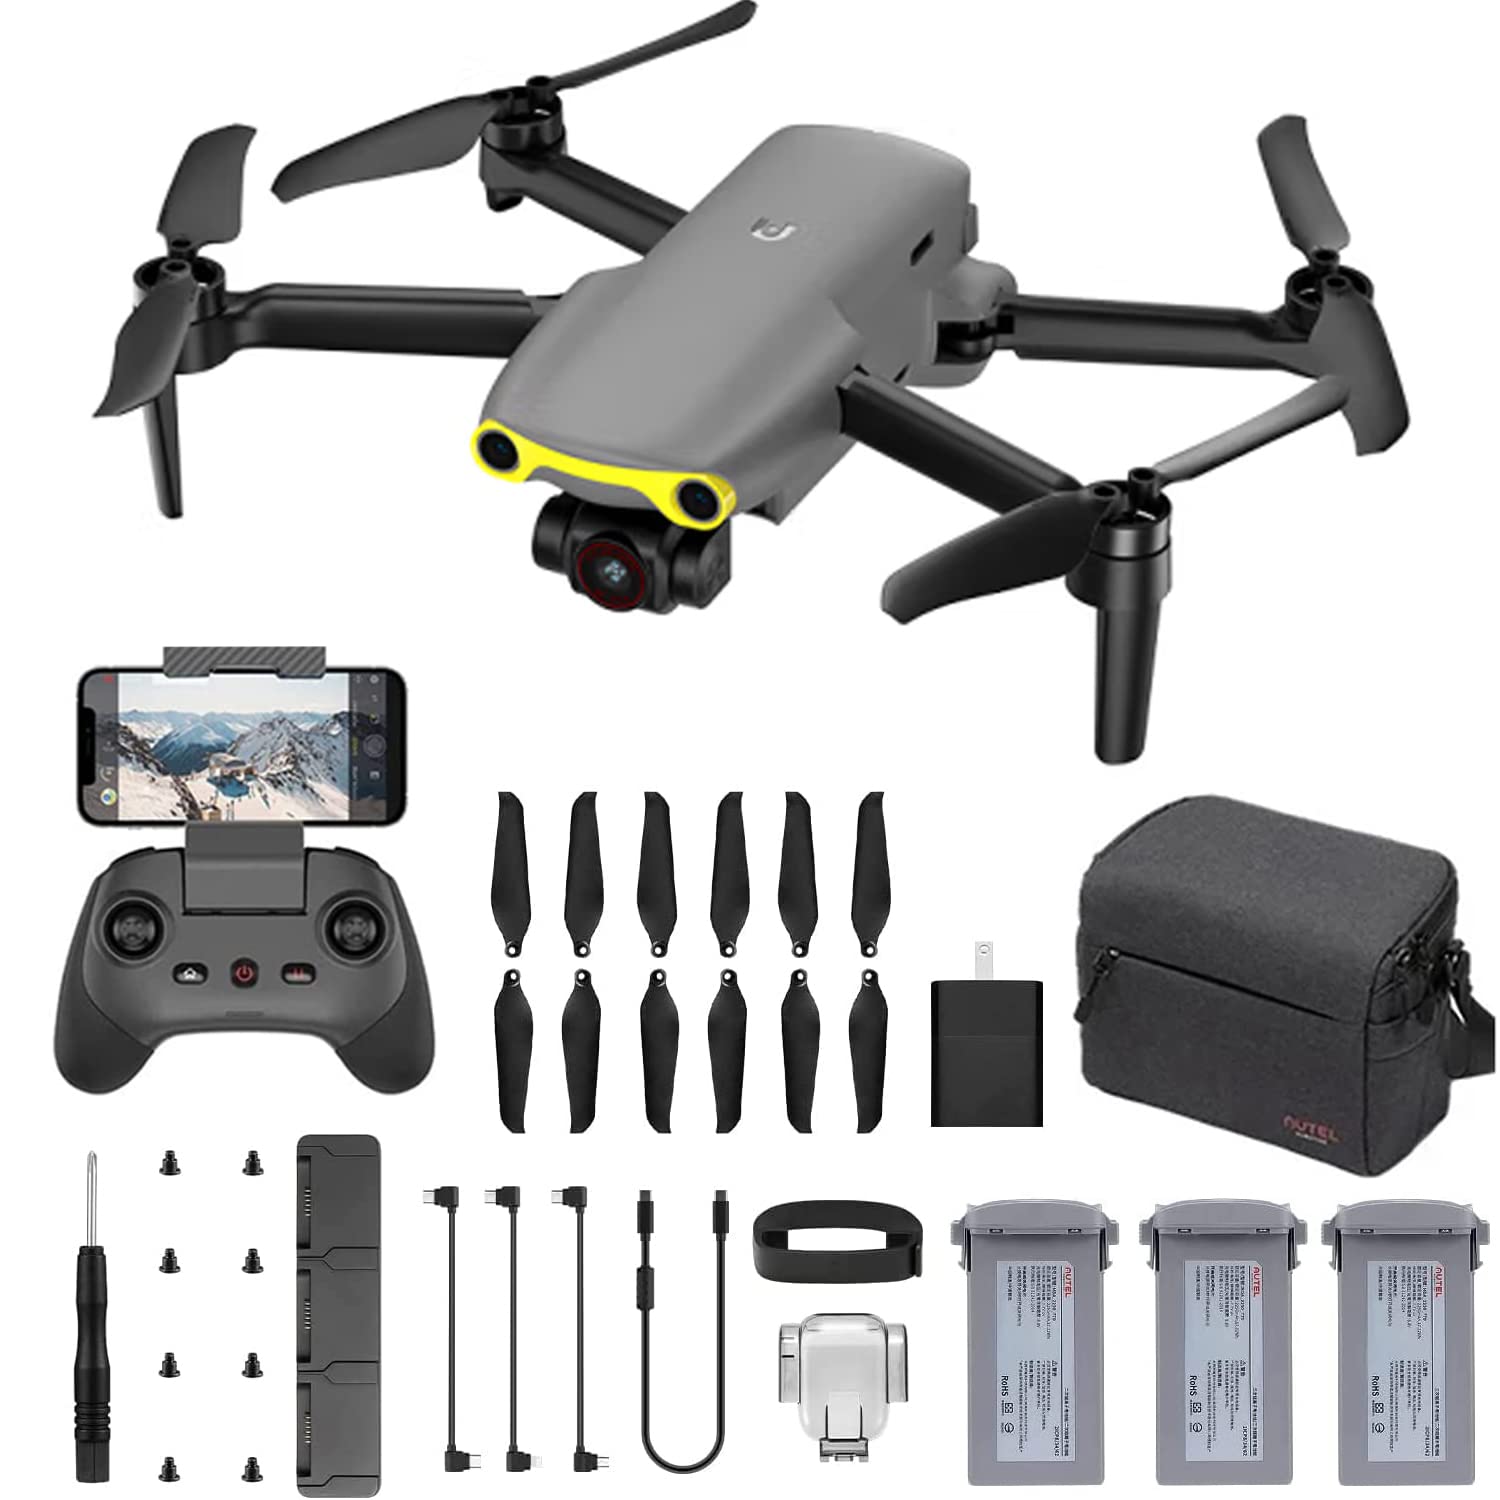 Autel Robotics EVO Nano+ More Combo - 249g Foldable Drone with 3-Axis Gimbal Camera,1/1.28CMOS, RYYB, 4K Camera,3D Obstacle Avoidance,PDAF + CDAF Focus with Must Have Accessories (Premium Bundle,Gray) von Autel Robotics